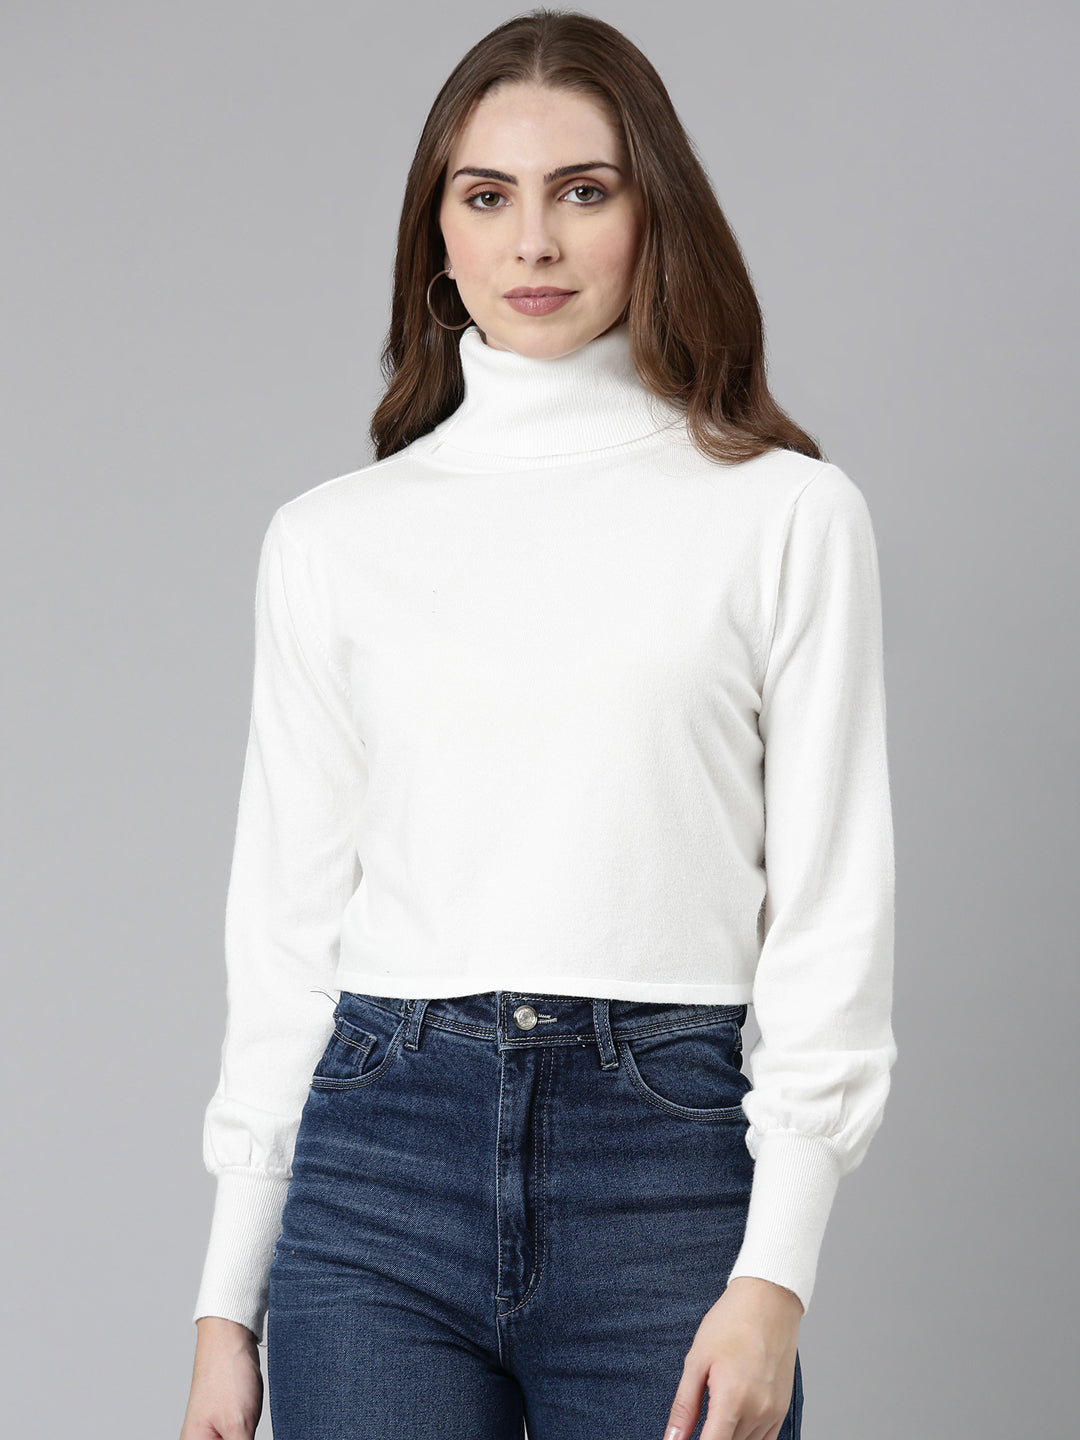 High Neck Solid Cuffed Sleeves White Crop Top